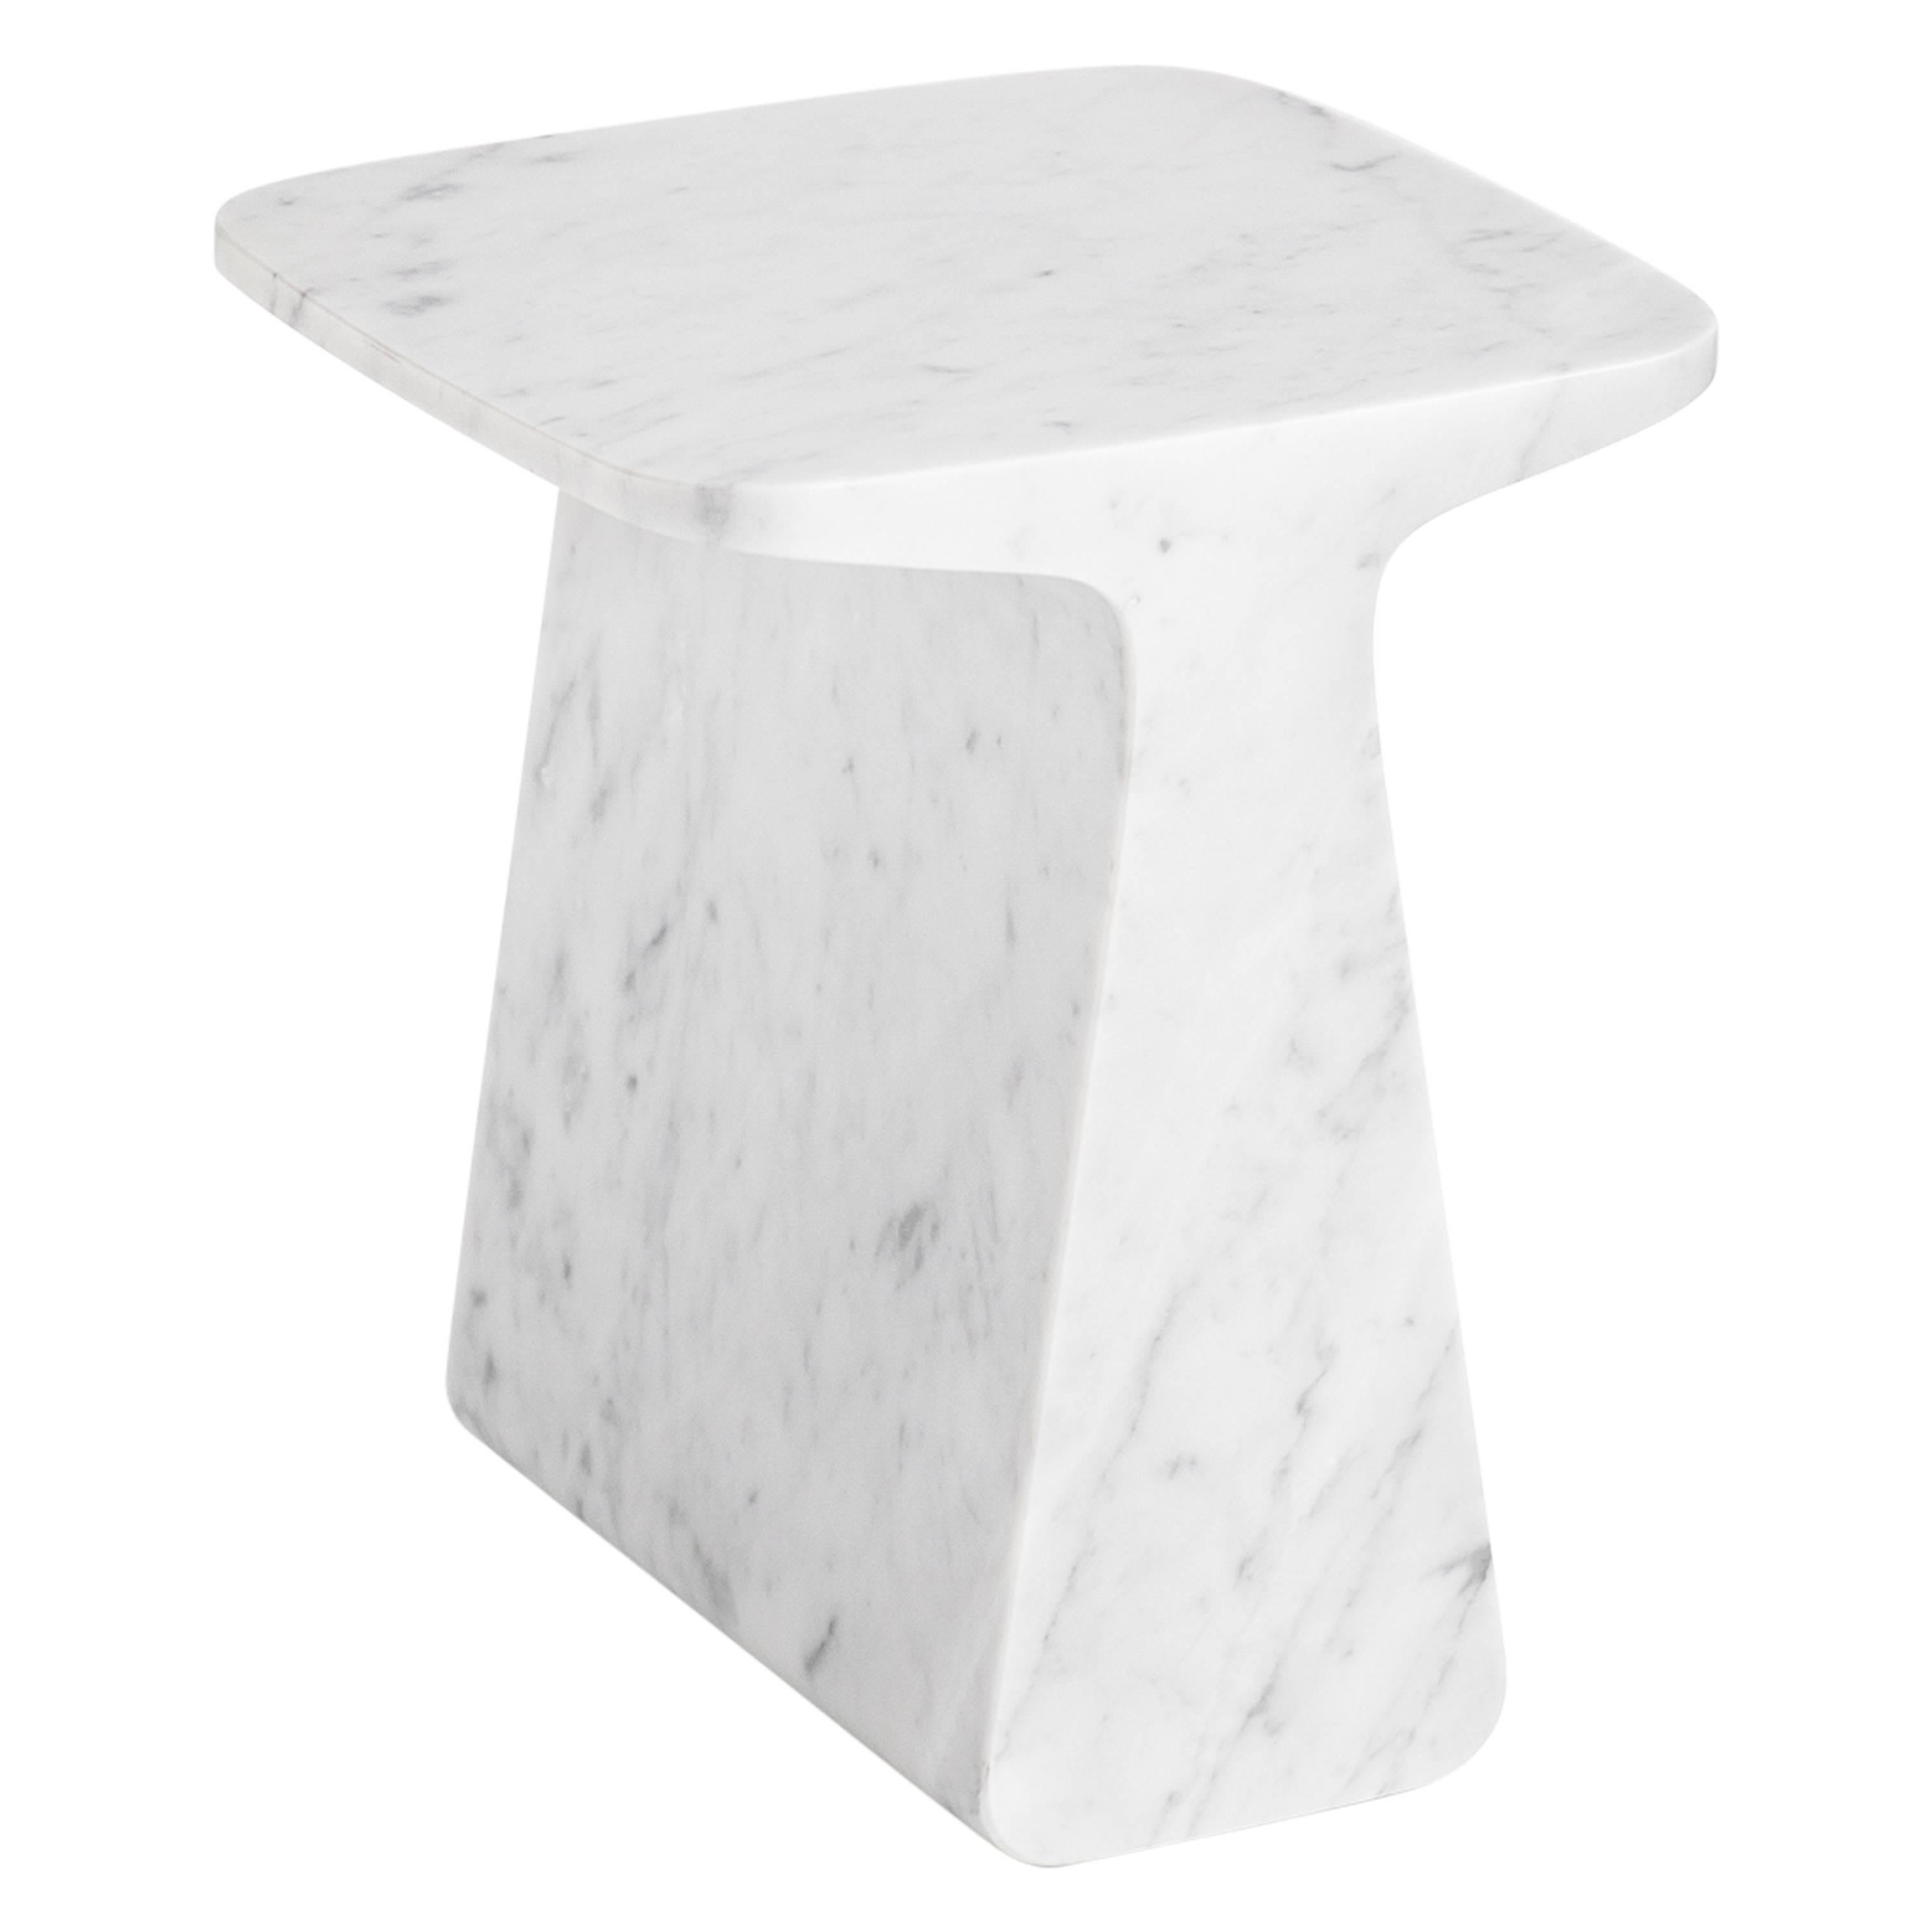 Pura is a side table extracted from a Carrara marble block. Solid and contained, either like a table, a base or a stool, Pura emanates presence and stillness. It's available in white and black marble and its finish is matte.

Designed by Adolfo